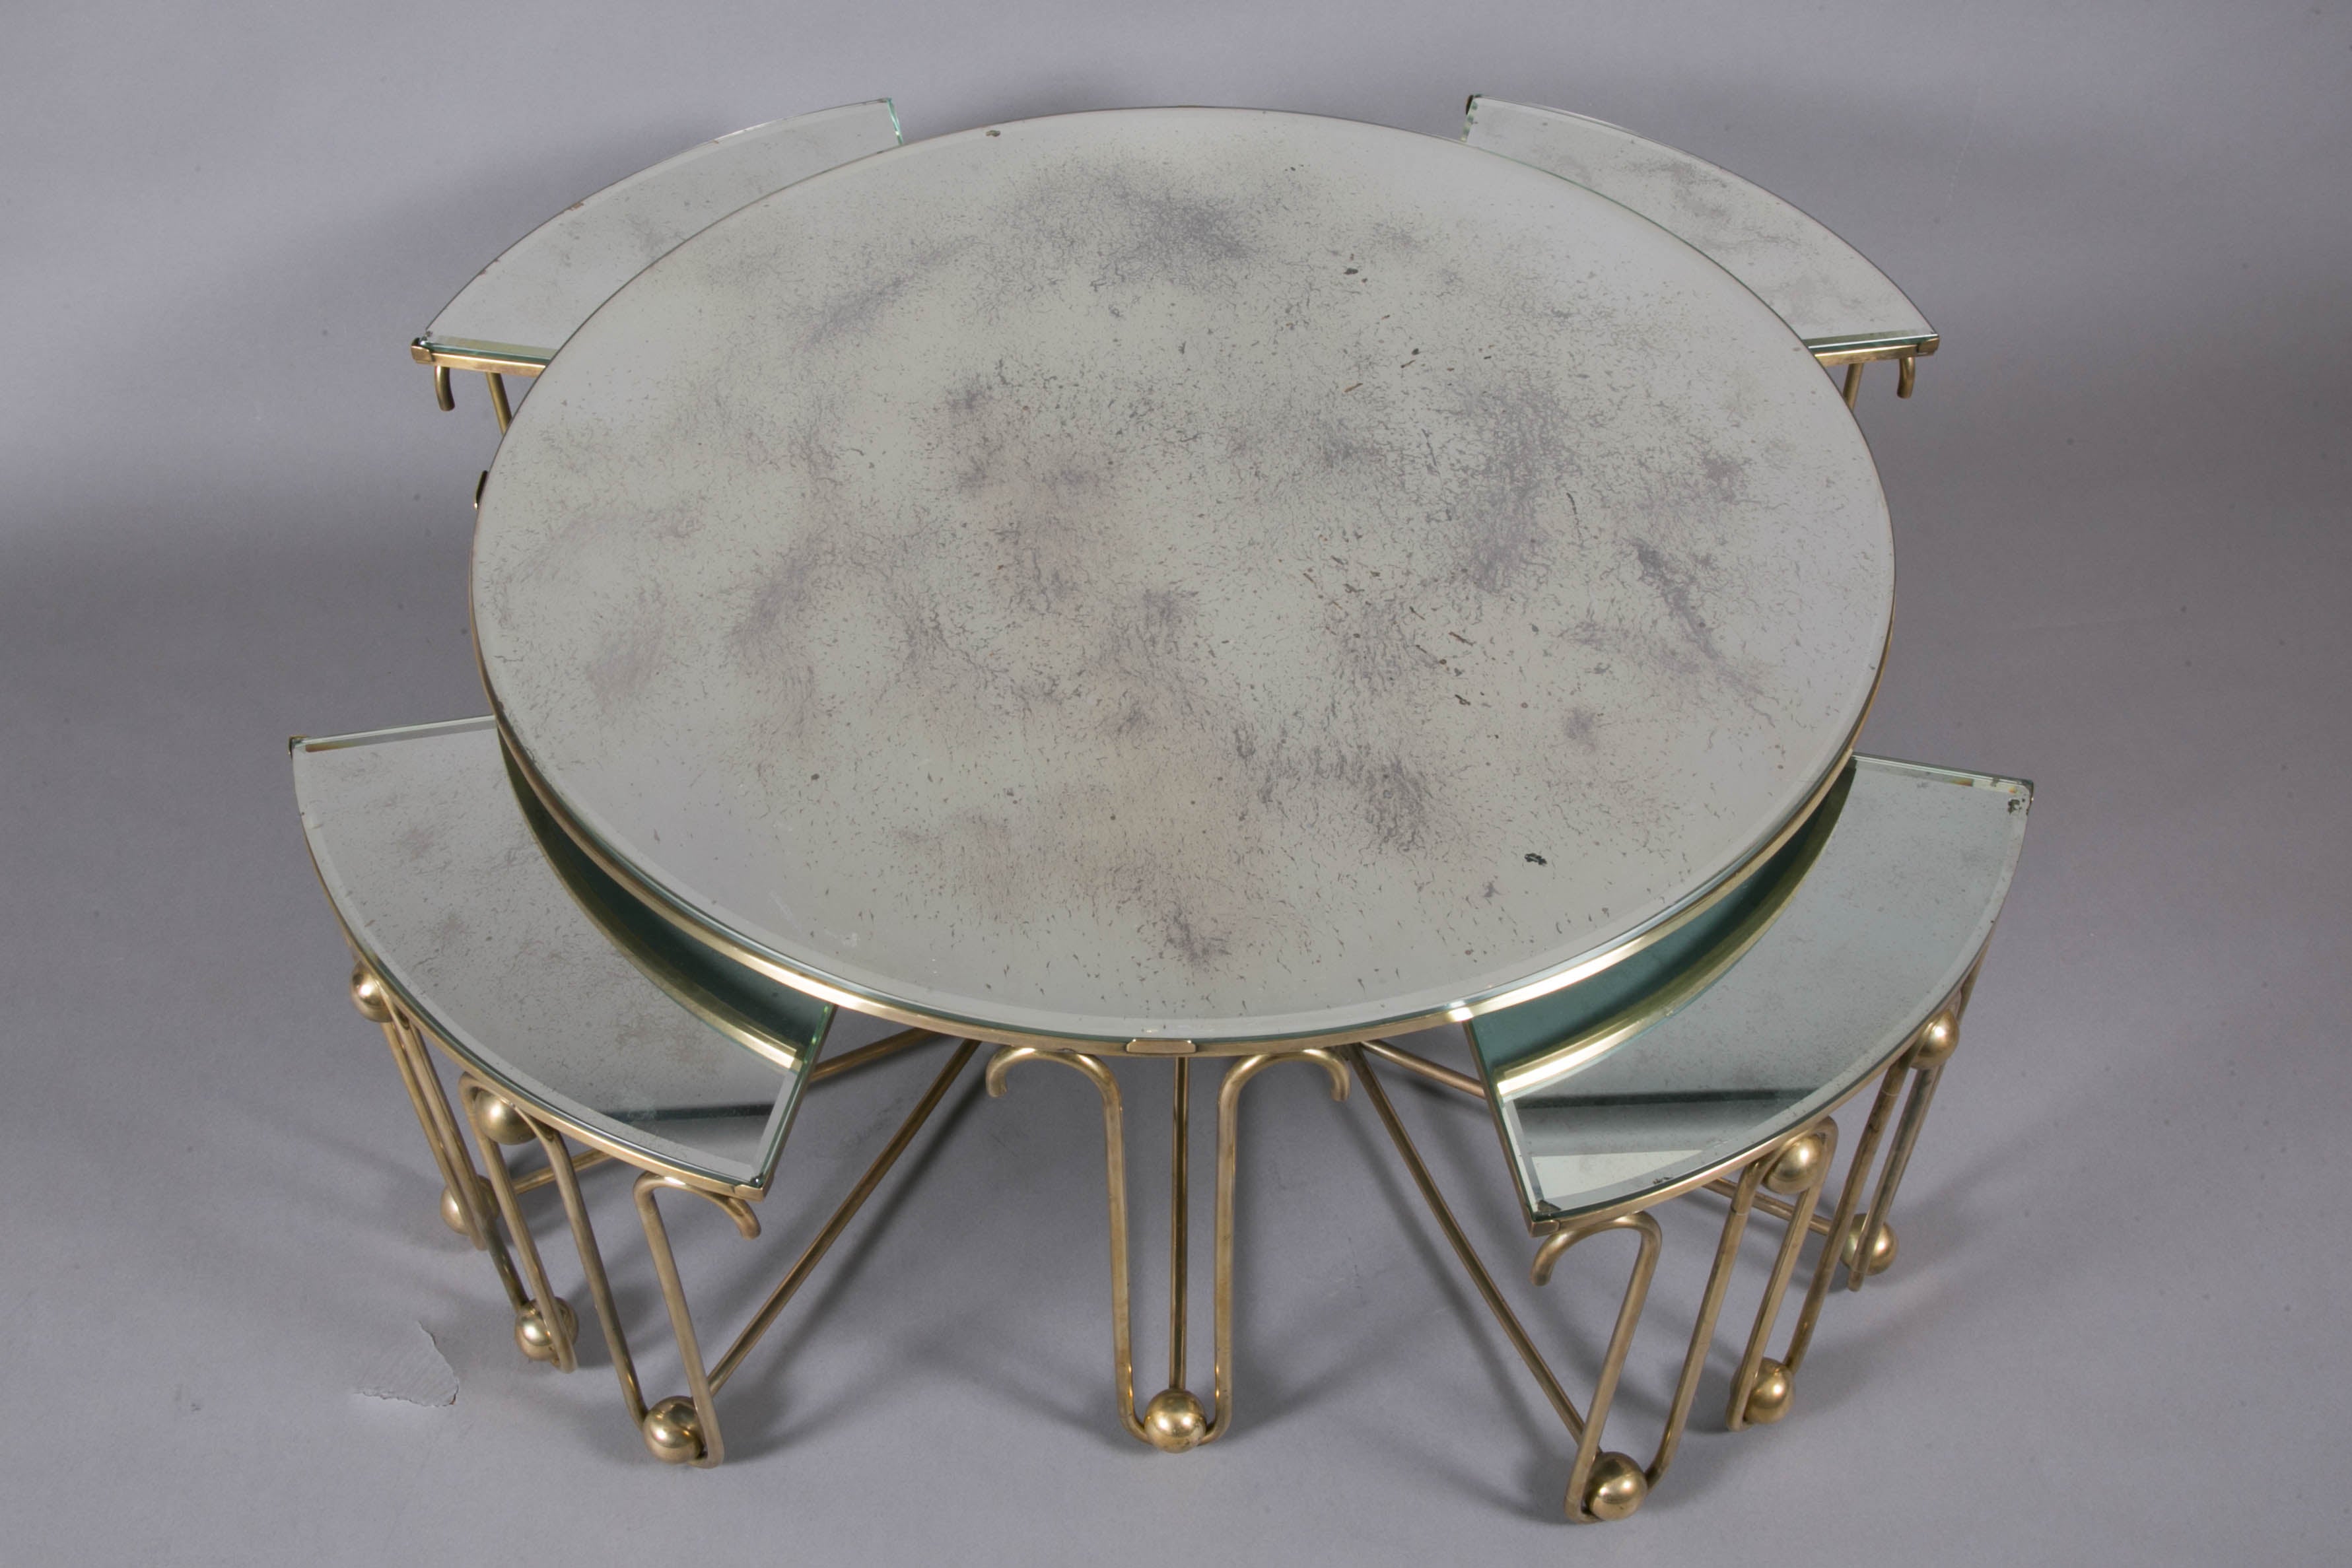 Beautiful gilt brass circular coffee table with four triangular nesting tables,
with bevelled mirror tops, by Jean Royère, 1950s.
Small tables: Height 35 x W 40 x D 36 cm.

R. Chavance, 